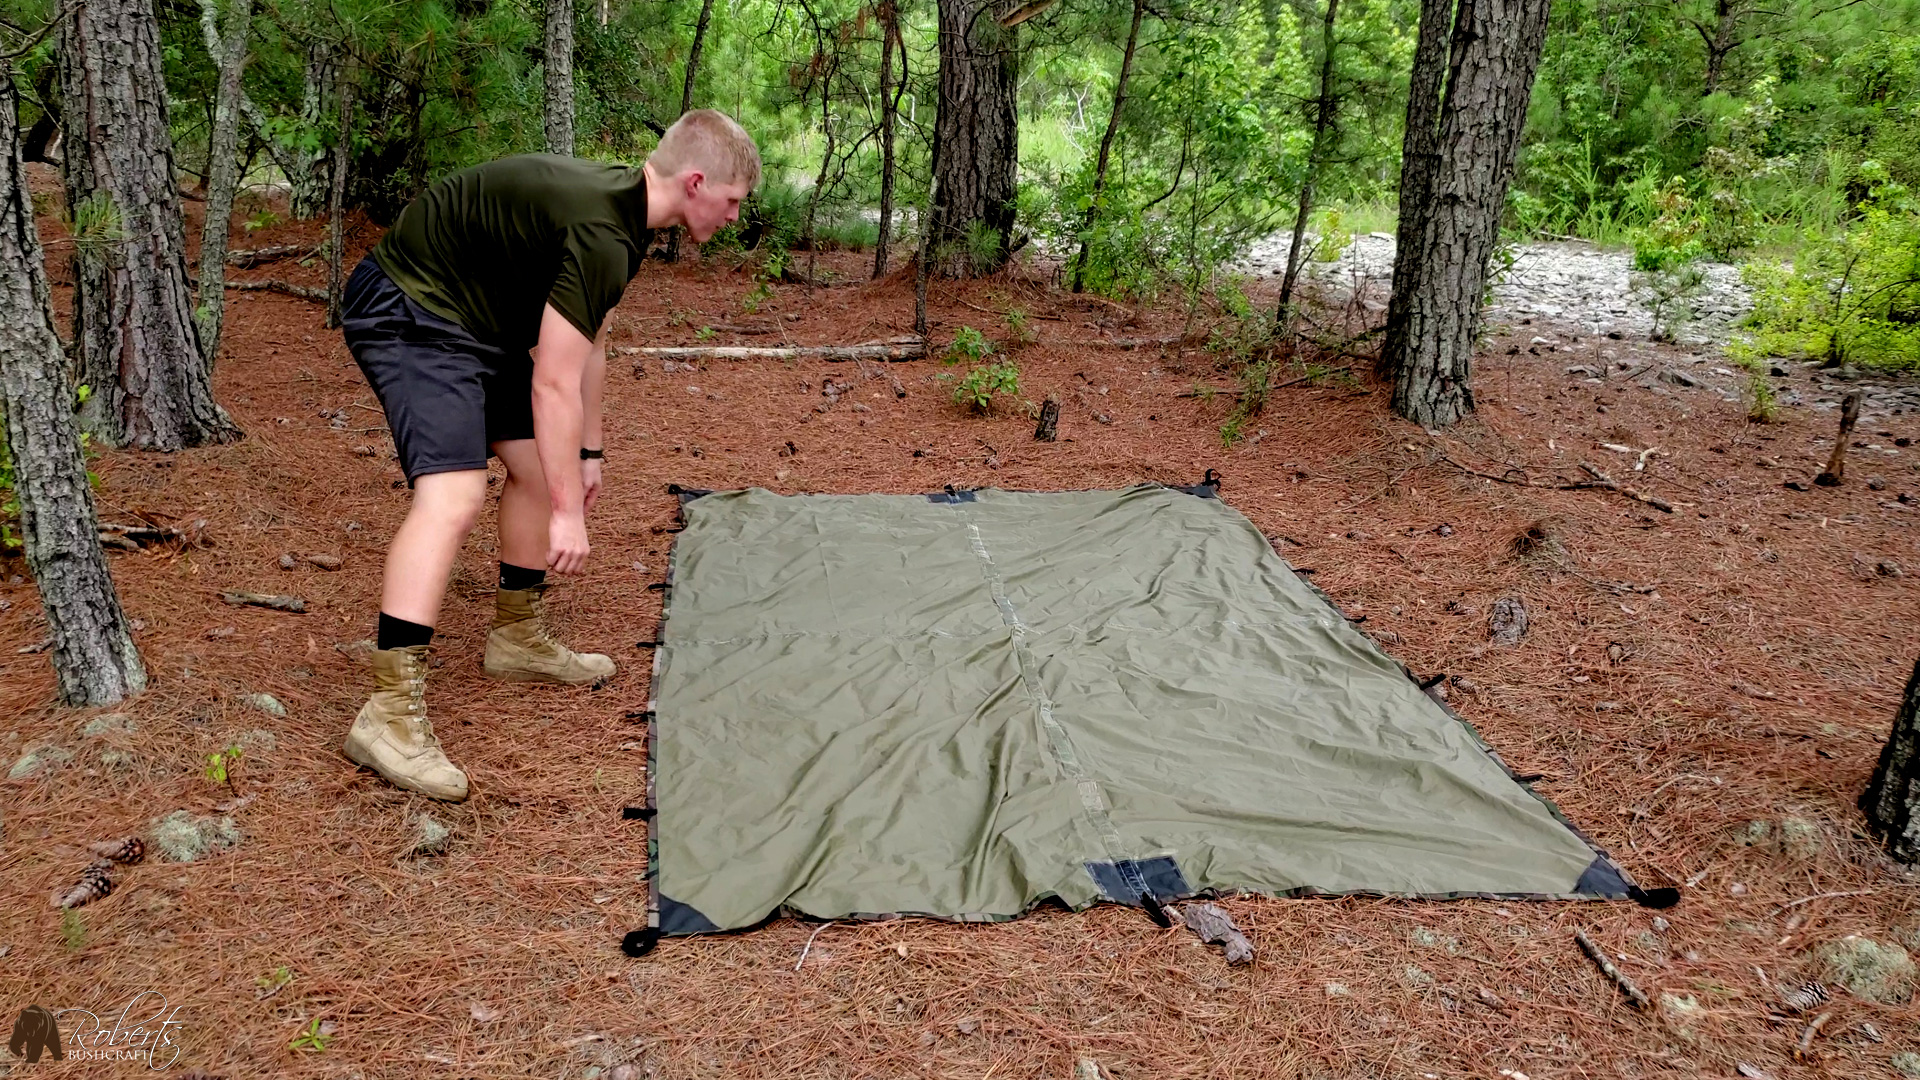 cleared ground of debris to layout my Aqua Quest tarp